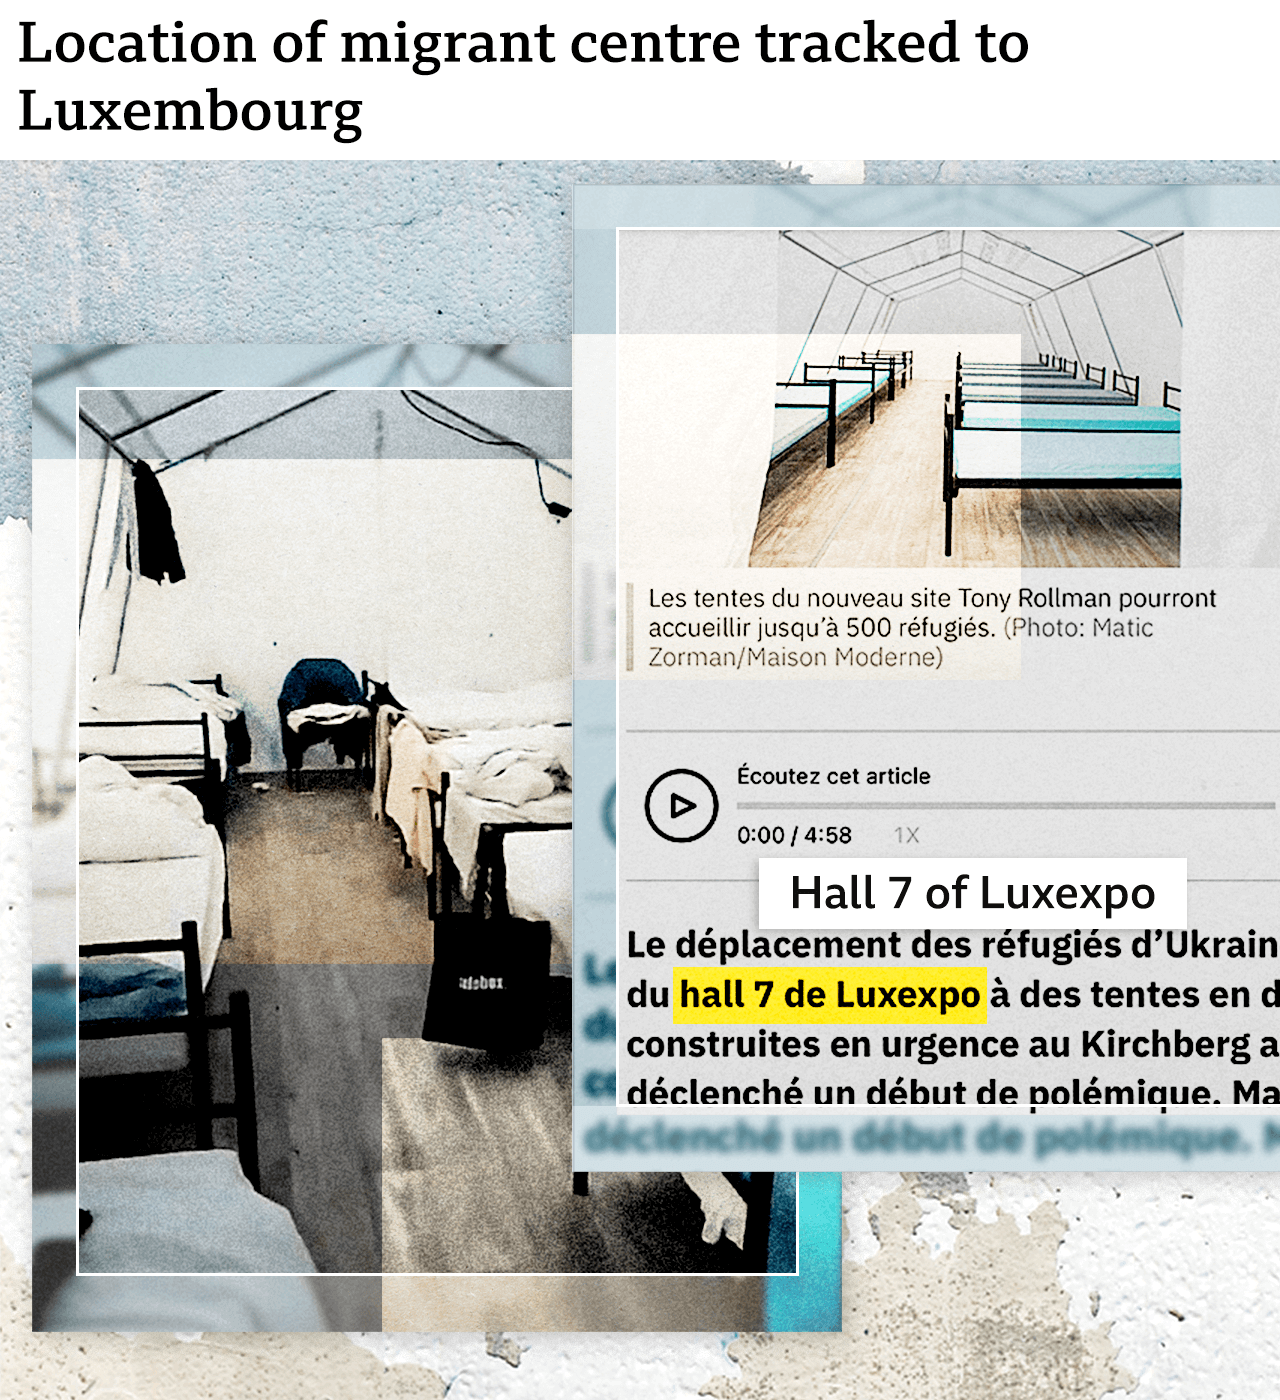 Location of migration centre tracked to Luxembourg